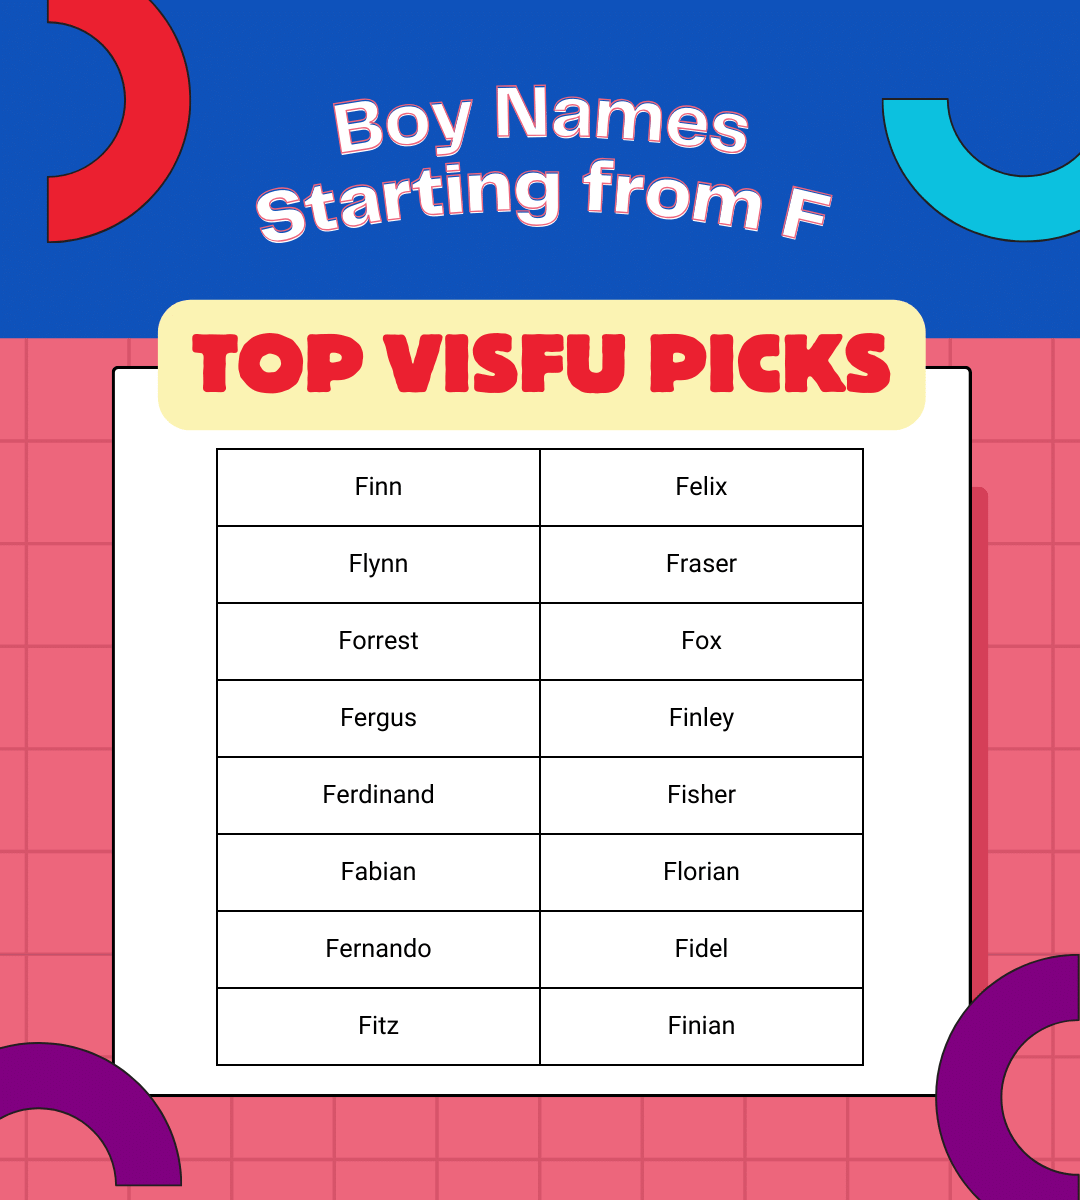 Boy names starting from F